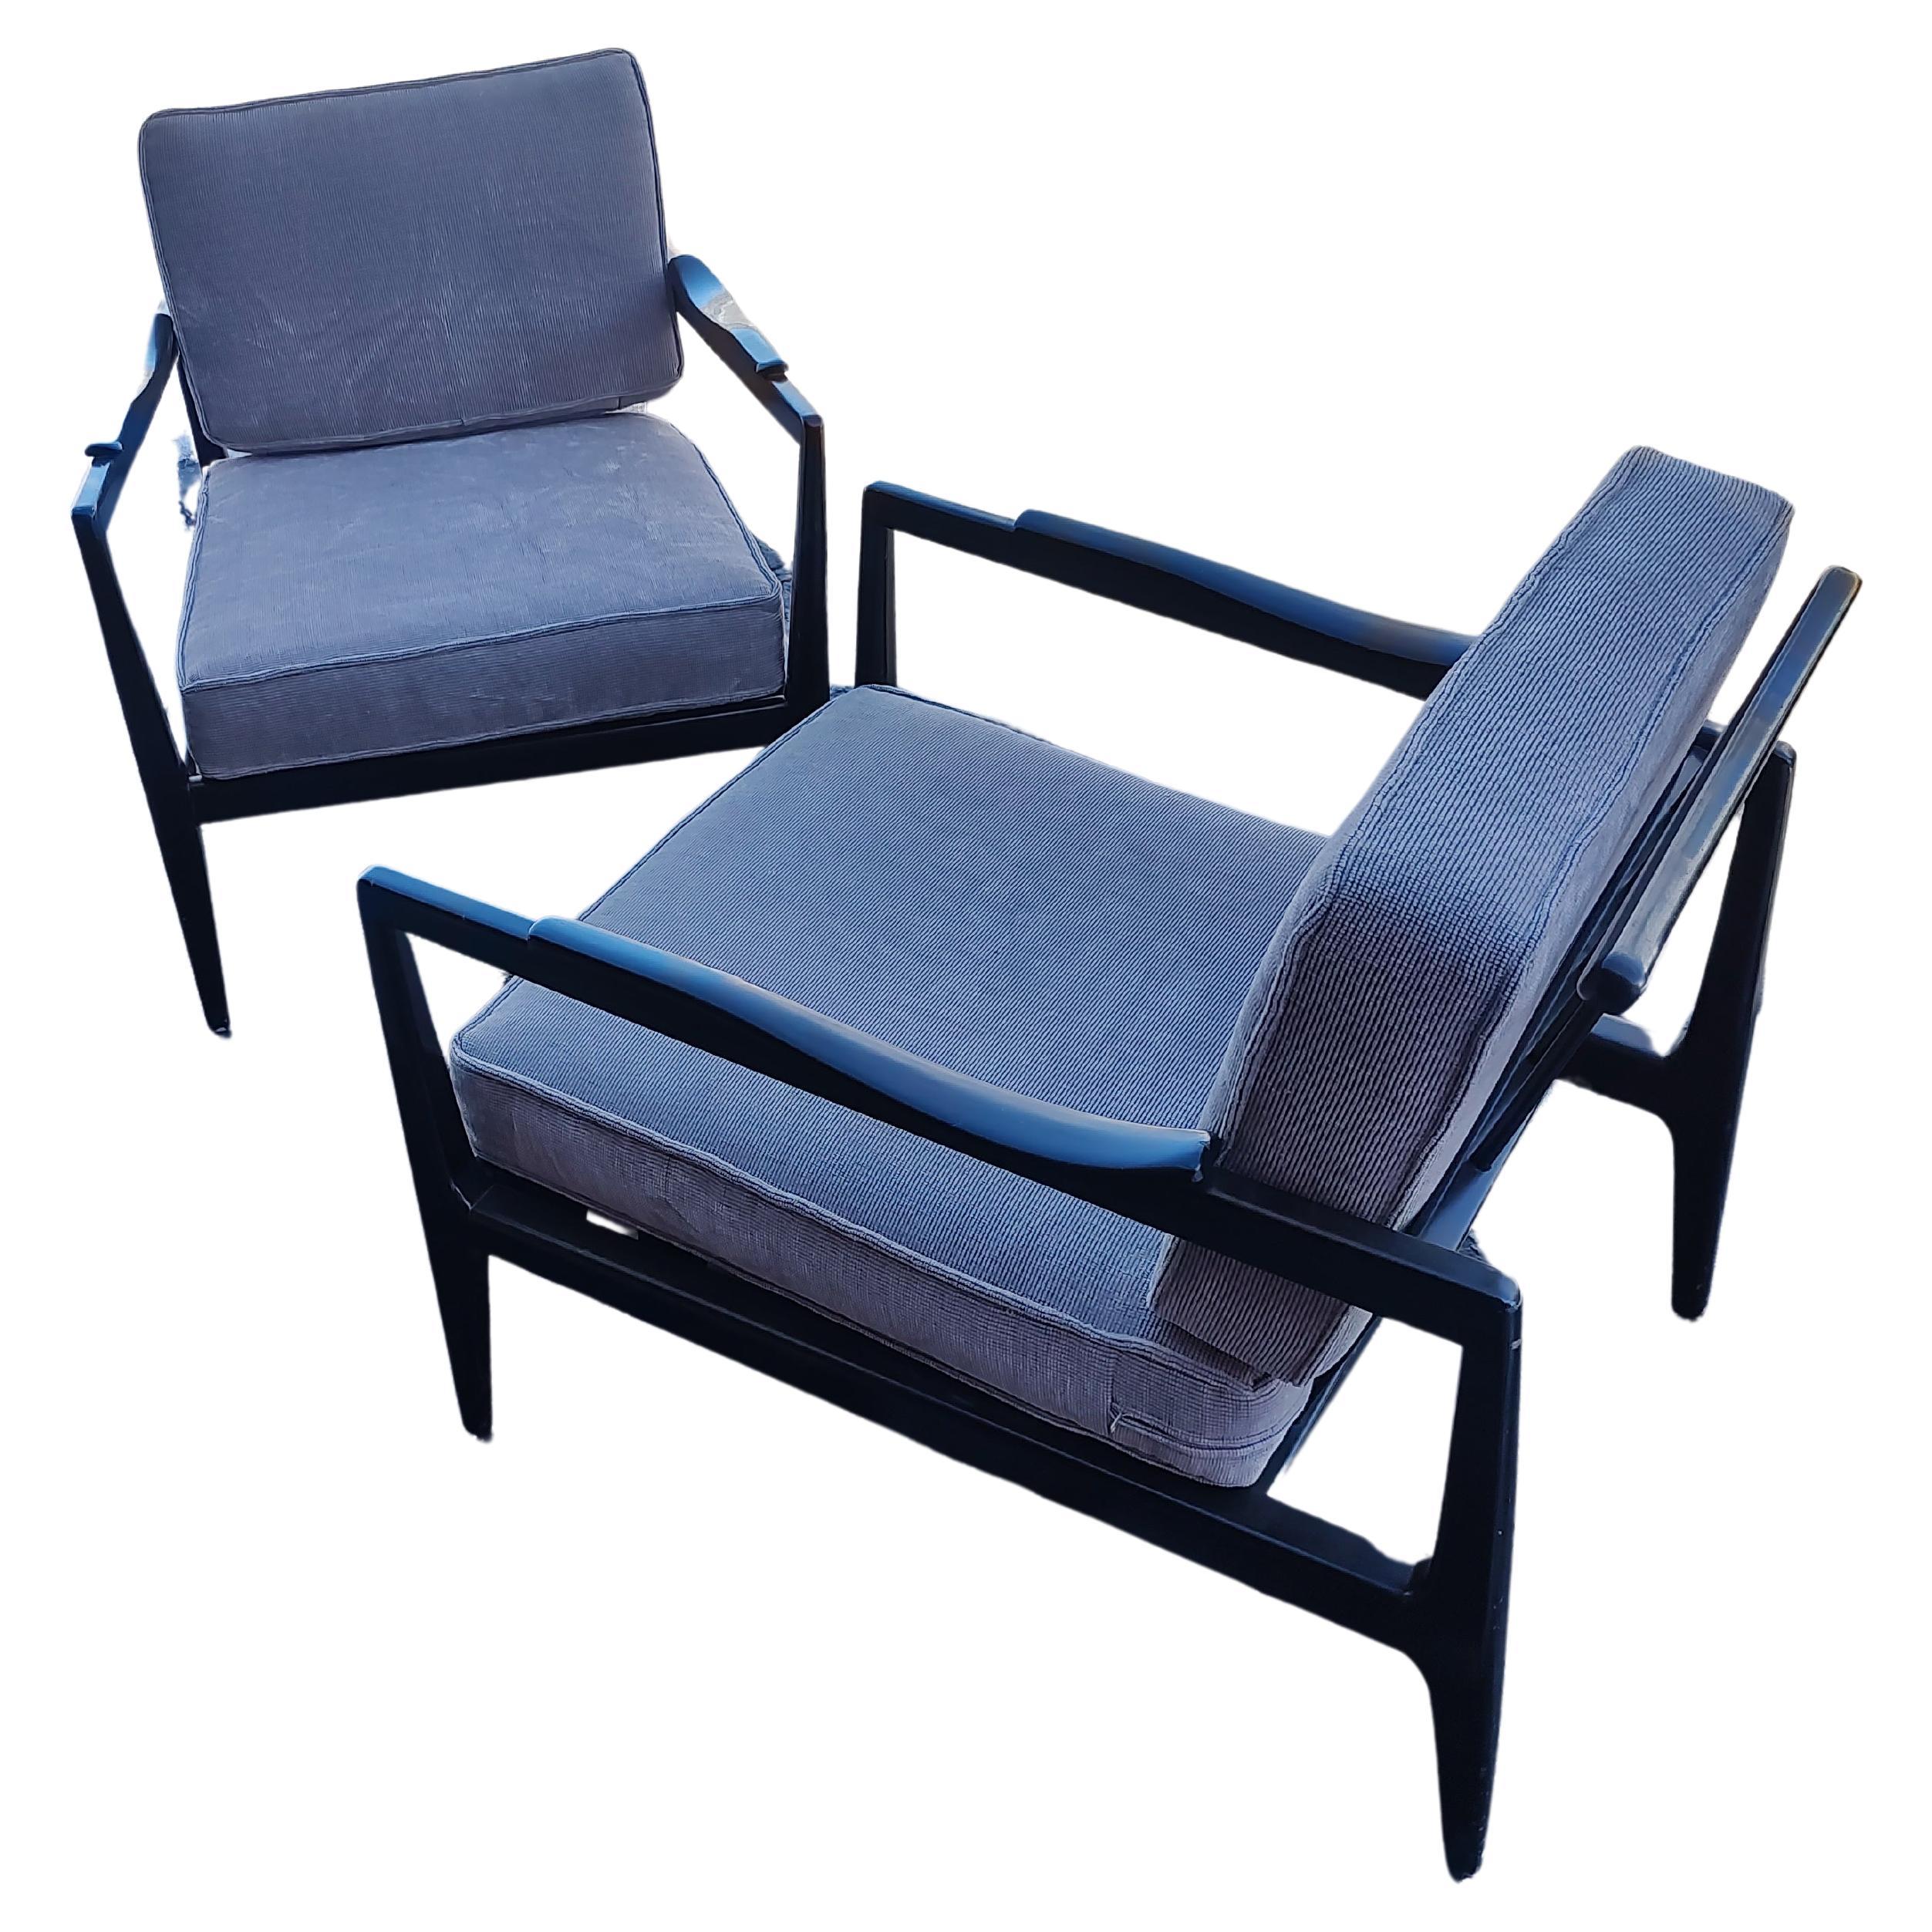 Pair of Mid Century Modern Sculptural Lounge Chairs by Edmond Spence